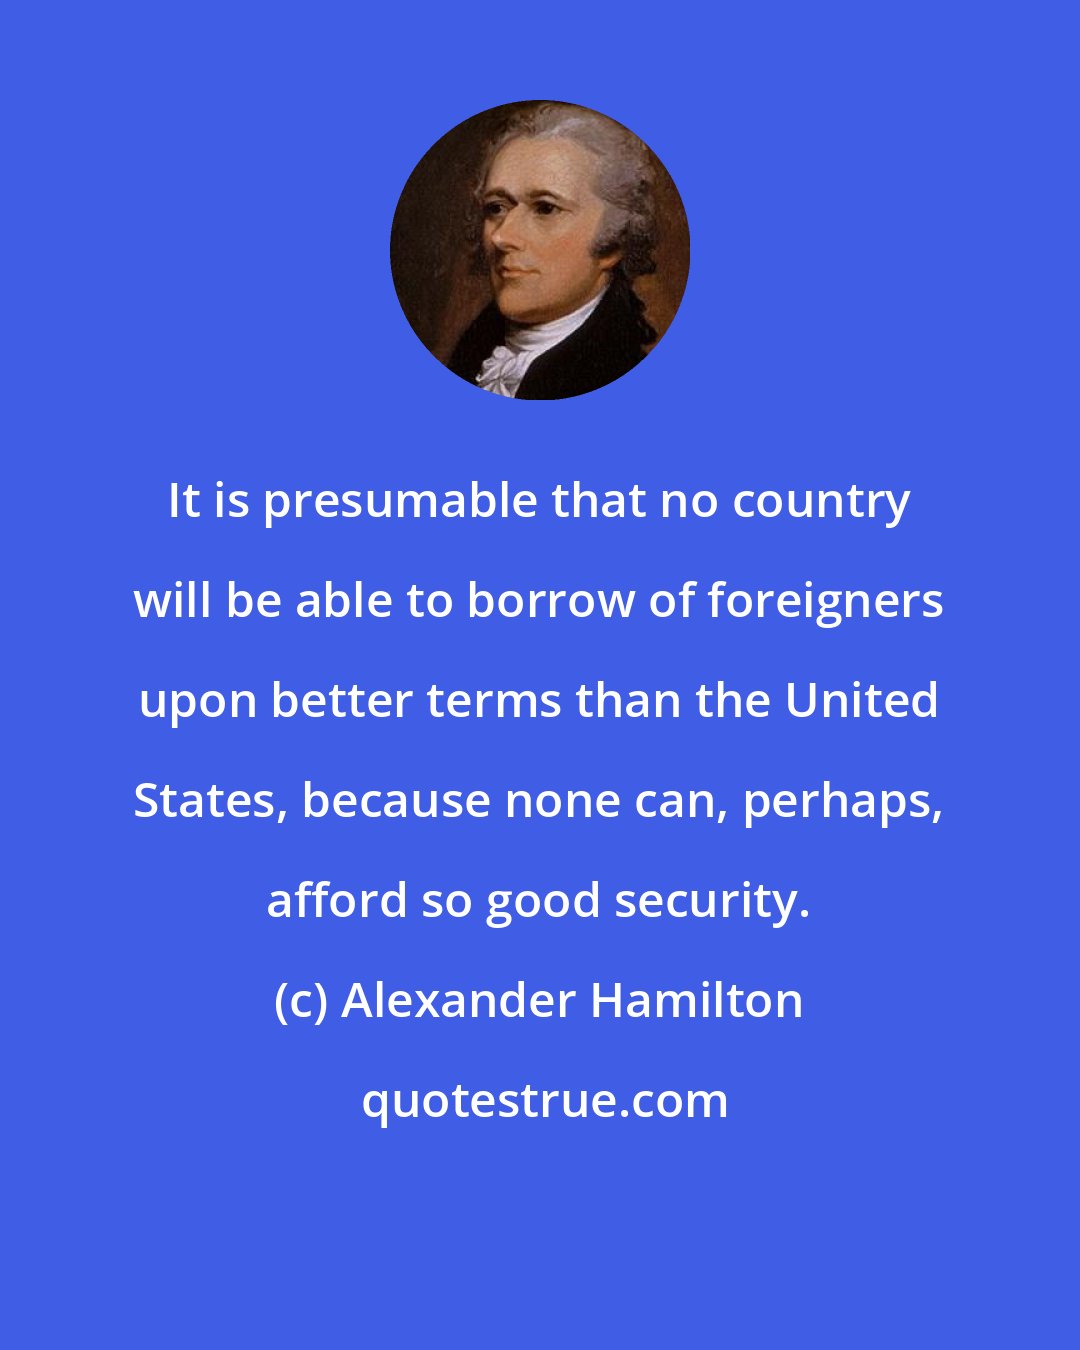 Alexander Hamilton: It is presumable that no country will be able to borrow of foreigners upon better terms than the United States, because none can, perhaps, afford so good security.